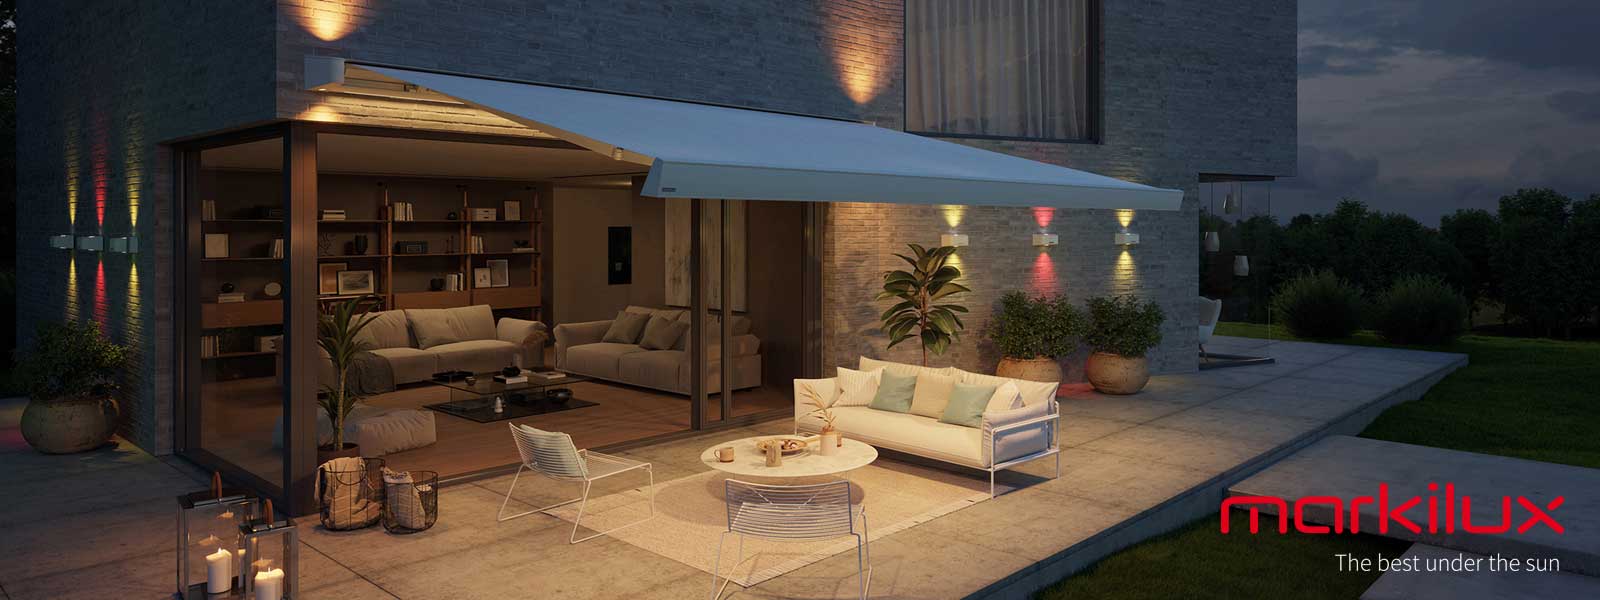 Markilux MX-3 awnings from Brite Blinds